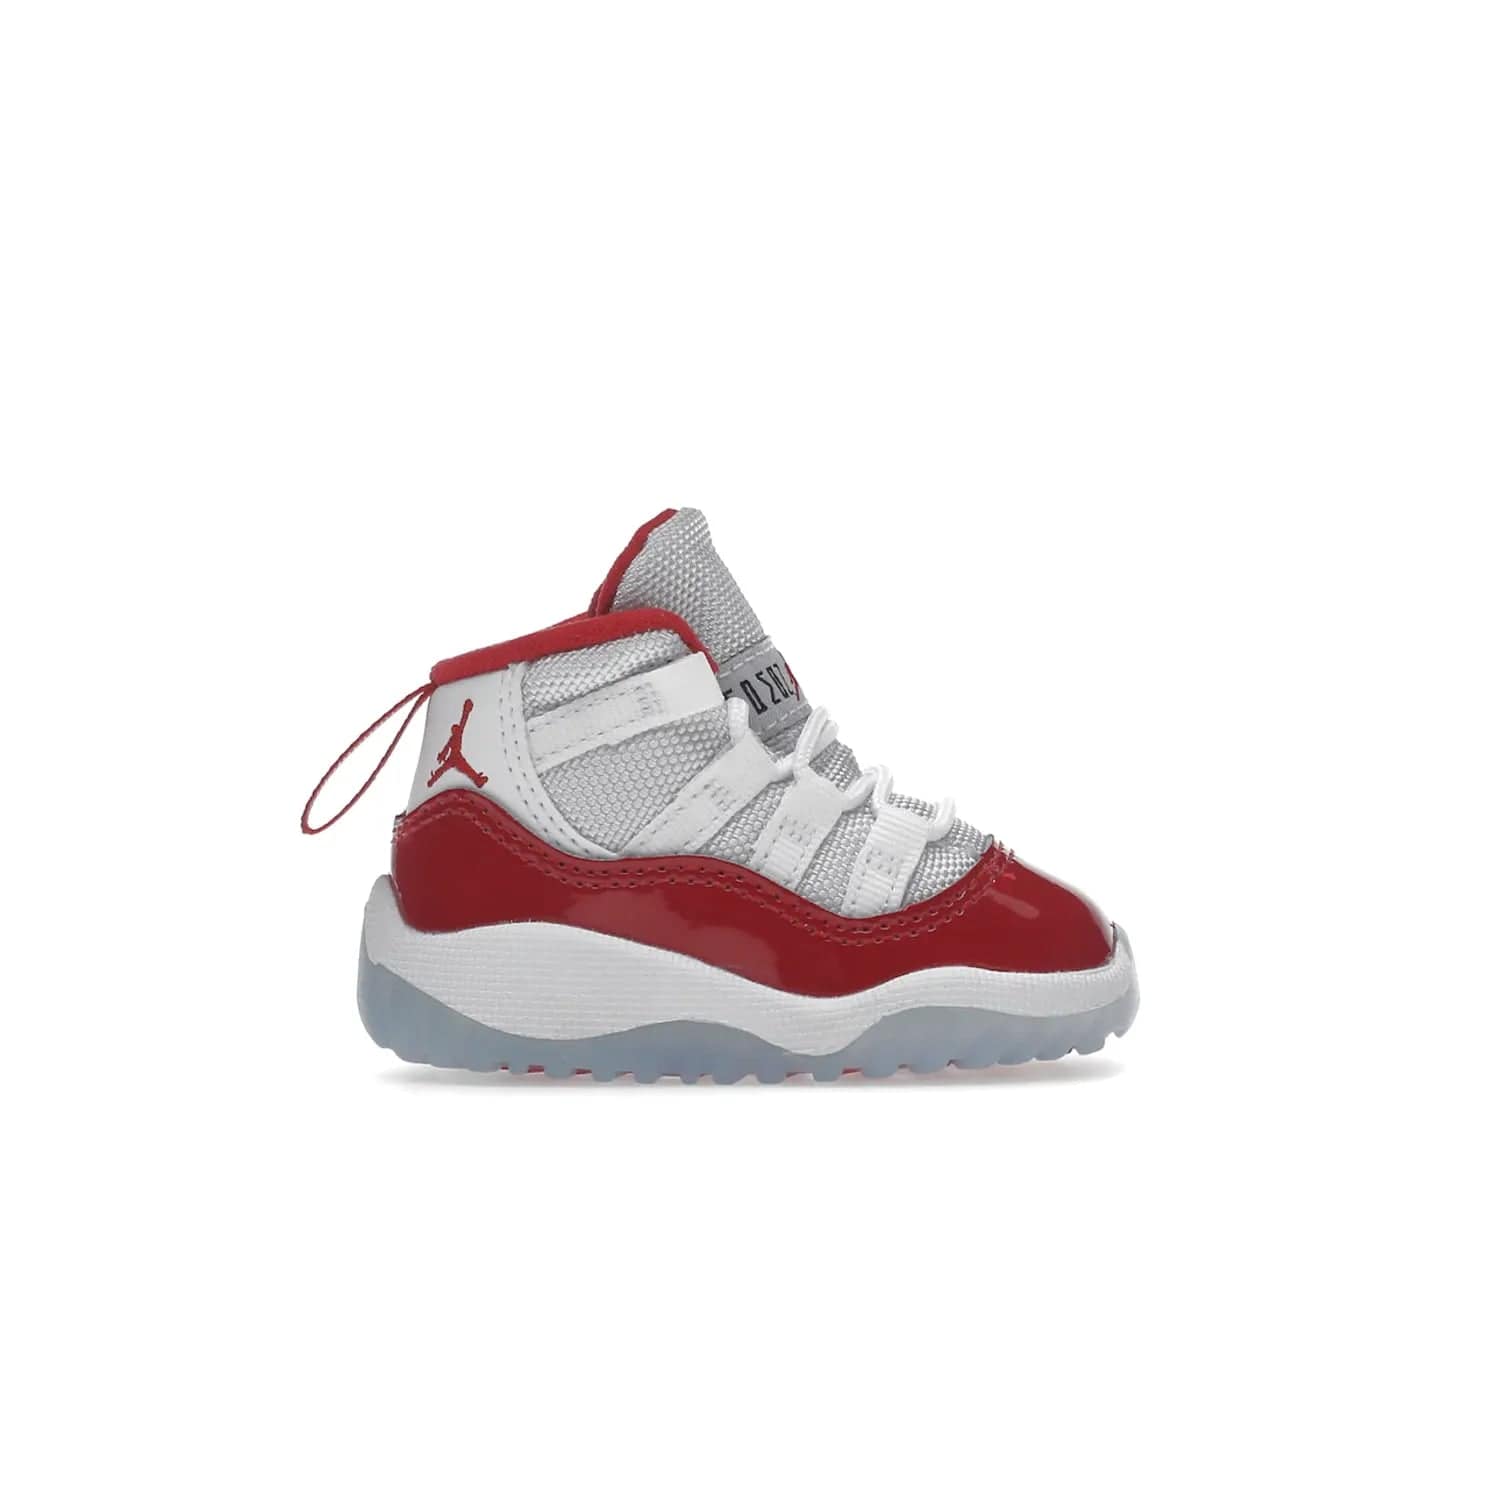 Jordan 11 Retro Cherry (2022) (TD) - Image 1 - Only at www.BallersClubKickz.com - Timeless classic. Air Jordan 11 Retro Cherry 2022 TD combines mesh, leather & suede for a unique look. White upper with varsity red suede. Jumpman logo on collar & tongue. Available Dec 10th, priced at $80.